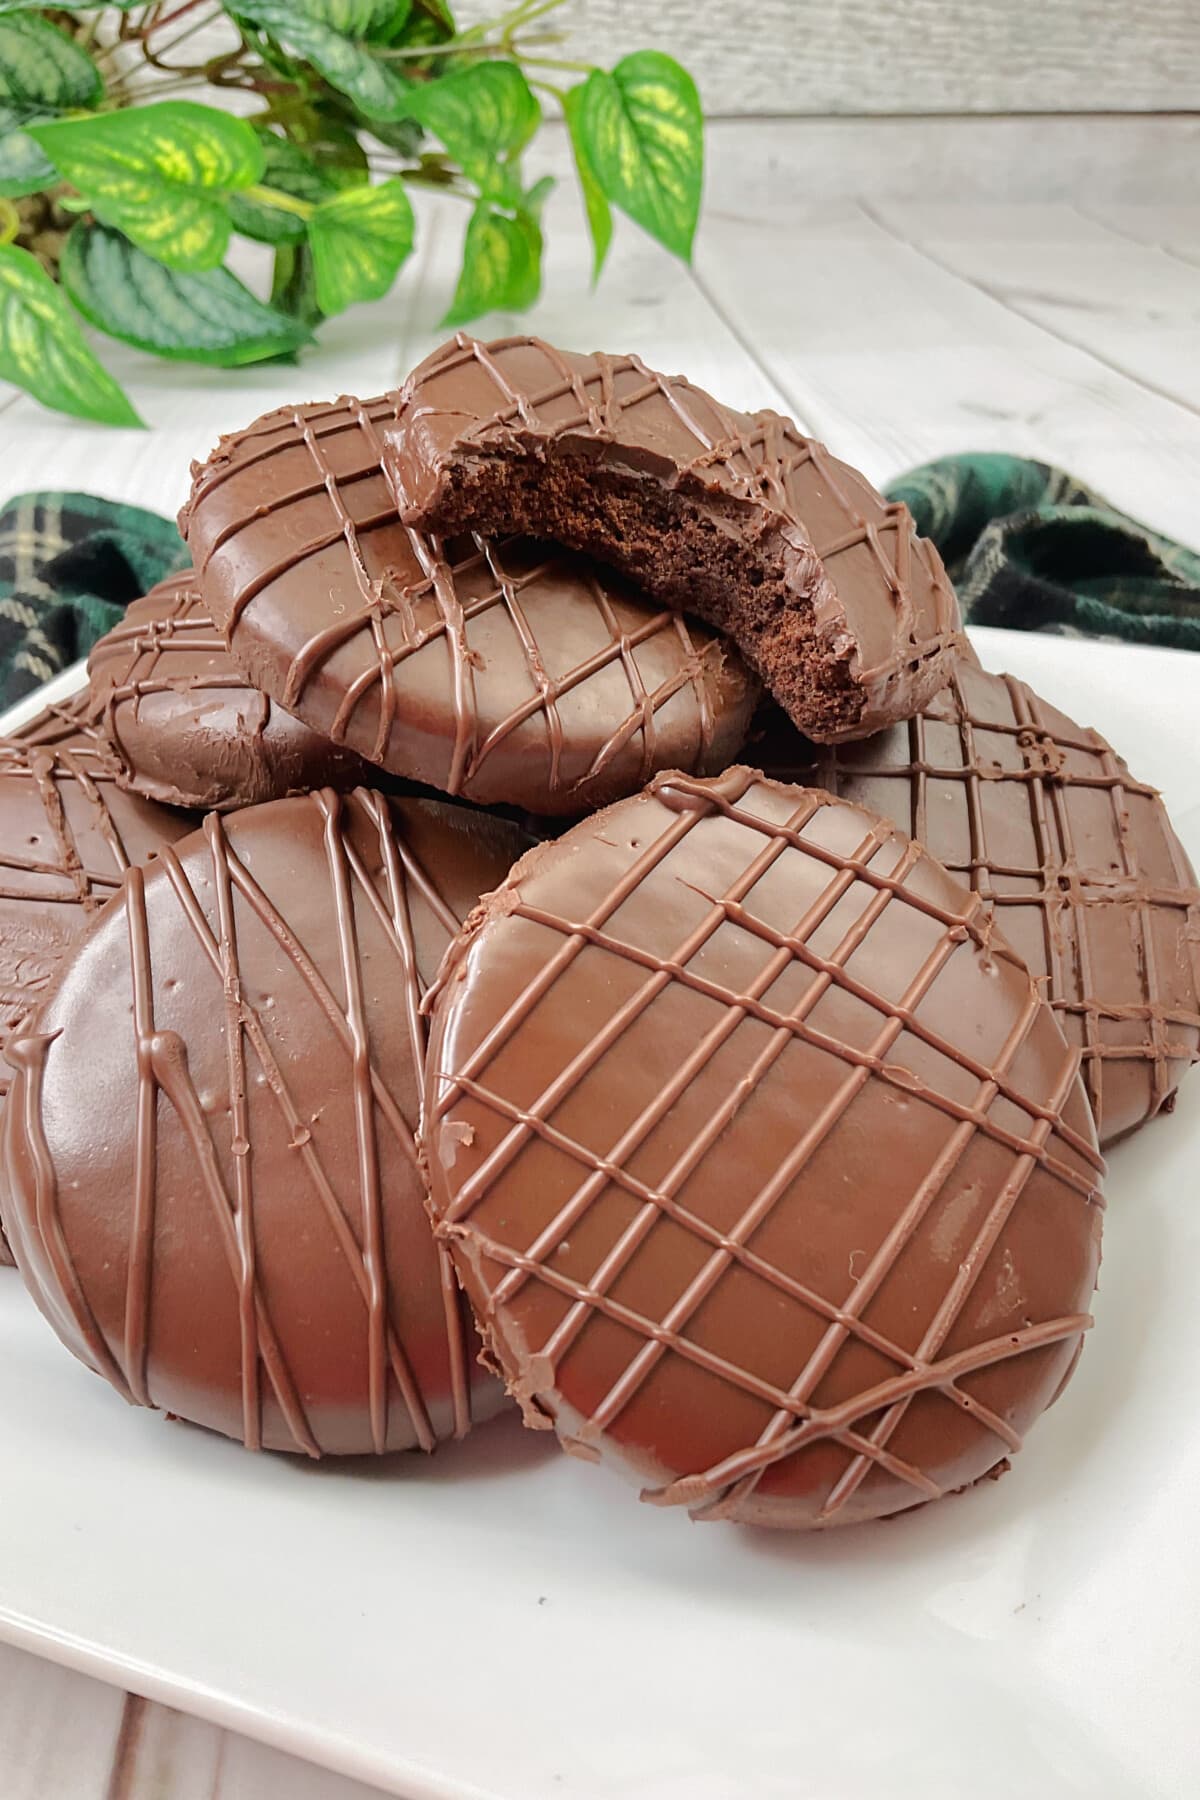 Homemade Thin Mints on a white plate.